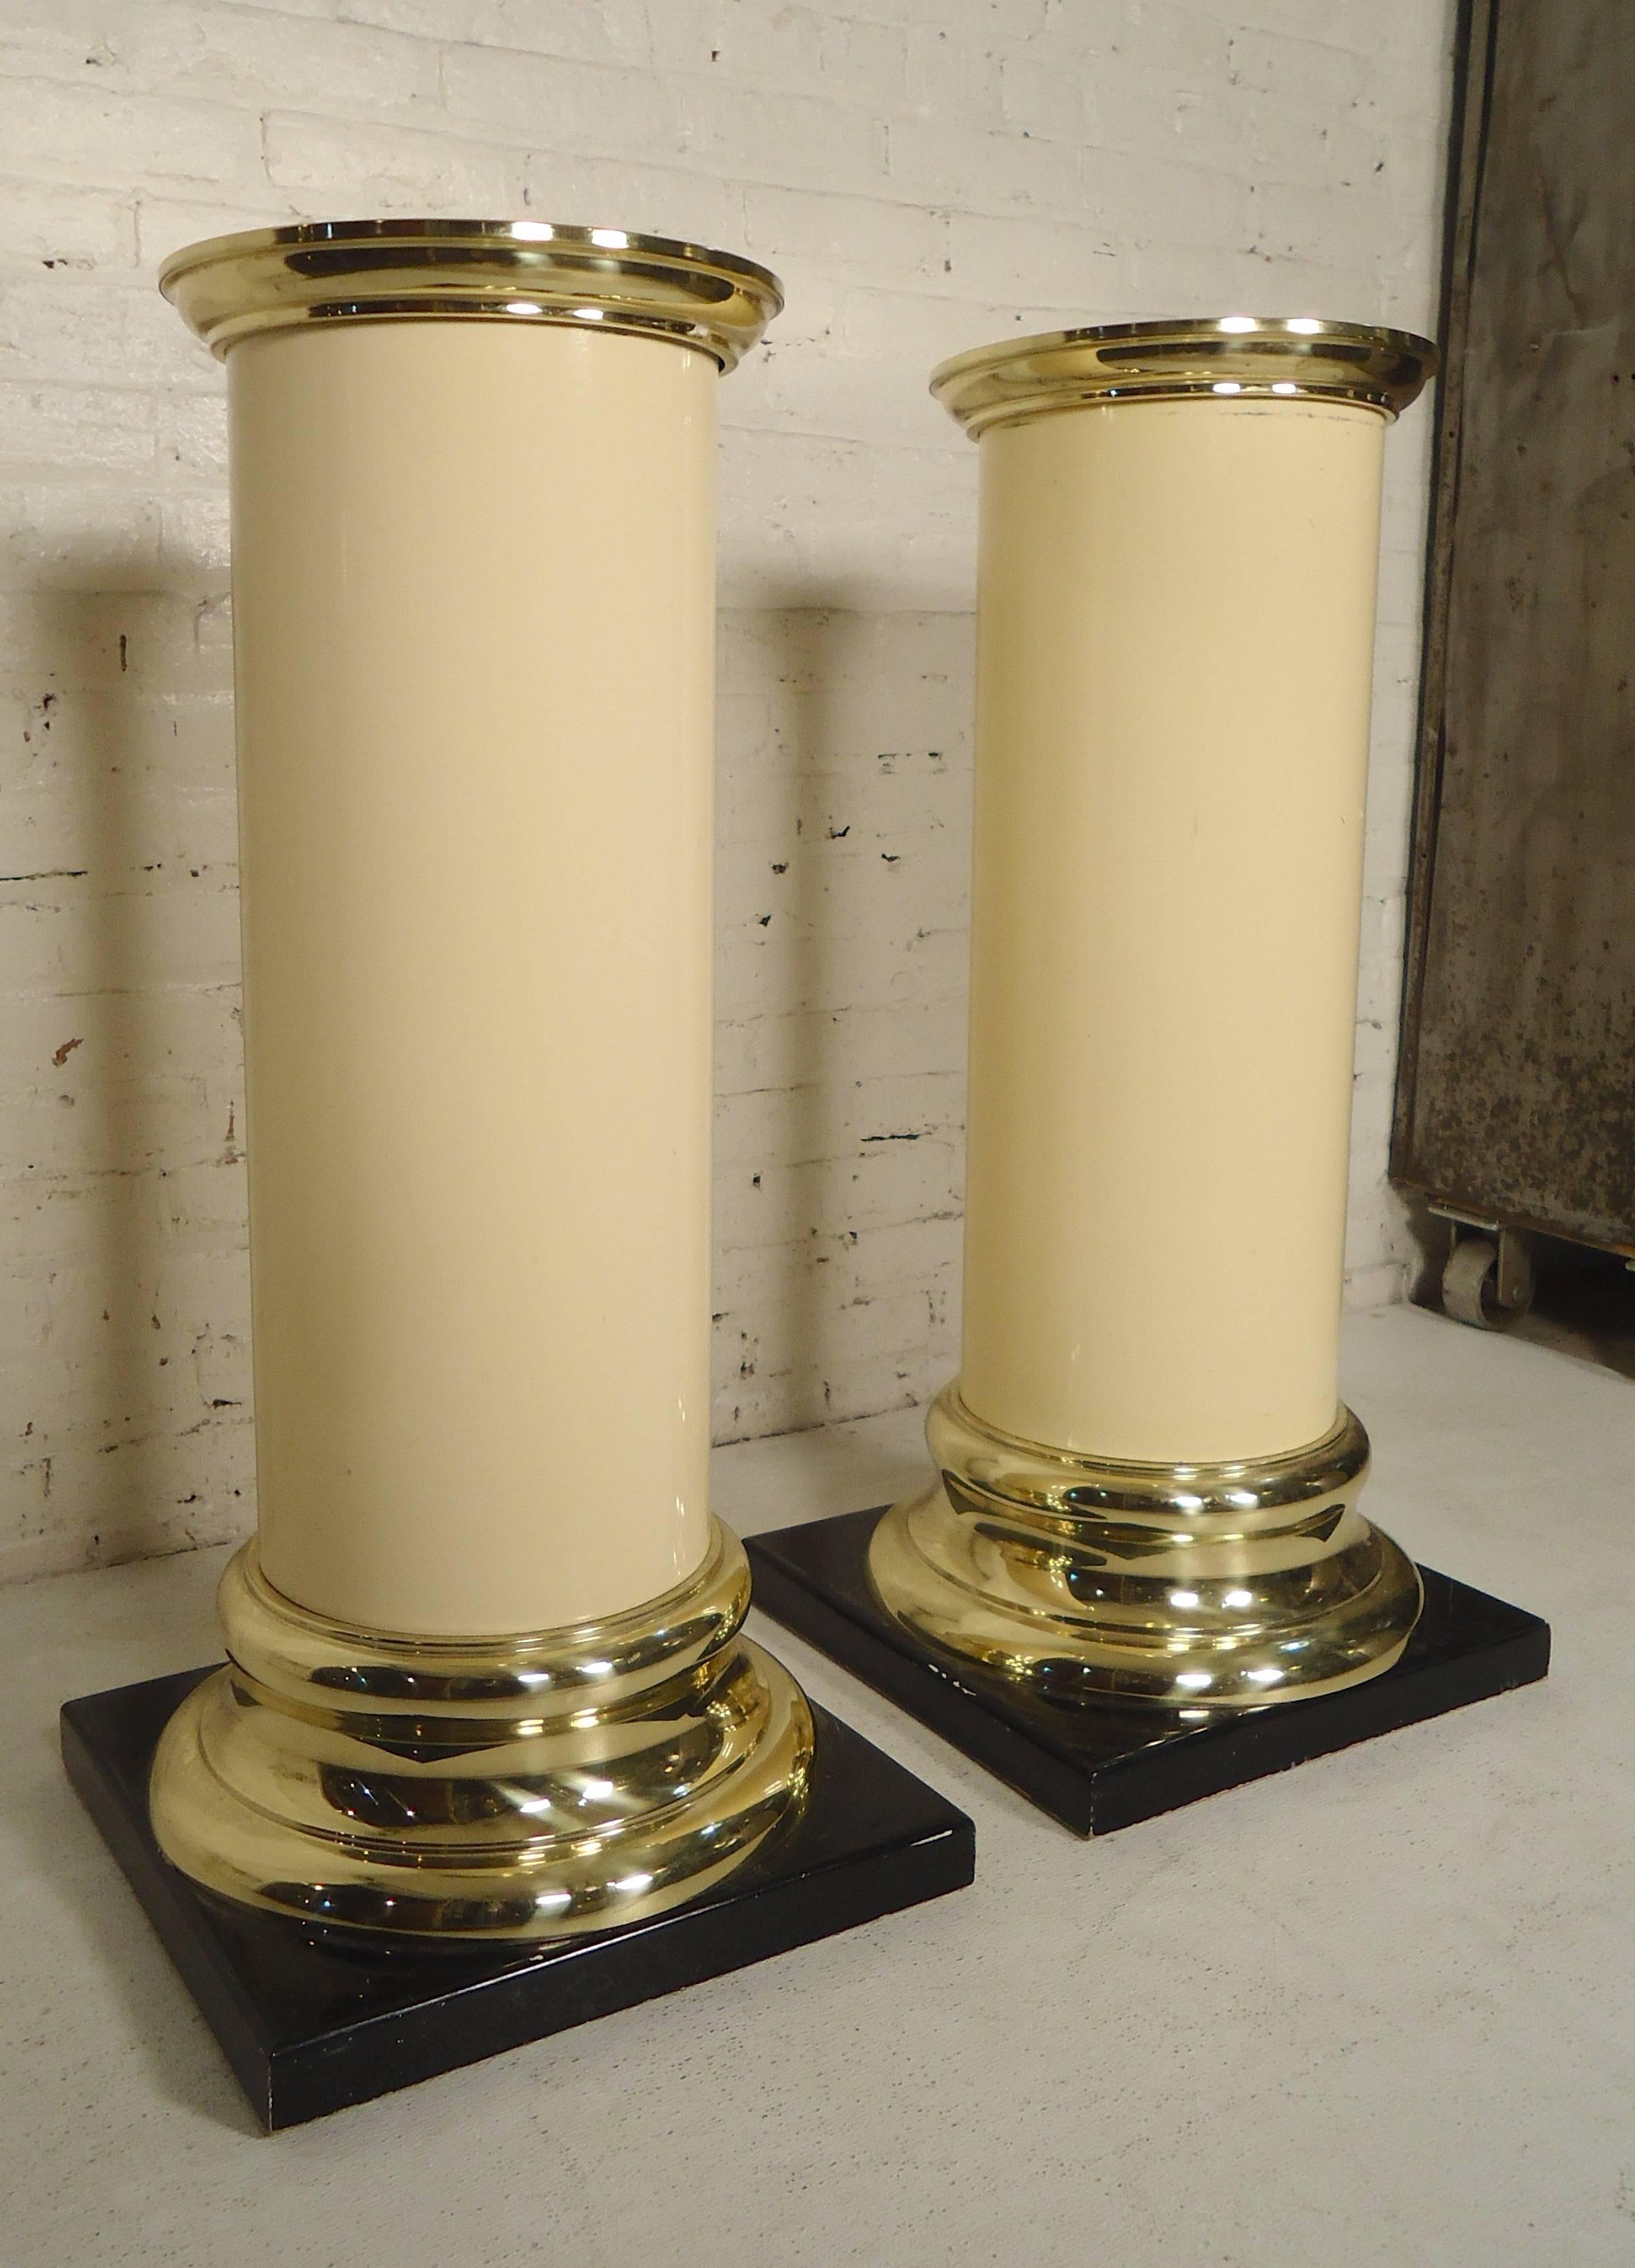 Round plastic off white pillars with brass color tops and bases set on black stands. Tagged underneath with the Trump Plaza Casino tag.

(Please confirm item location - NY or NJ - with dealer).
 